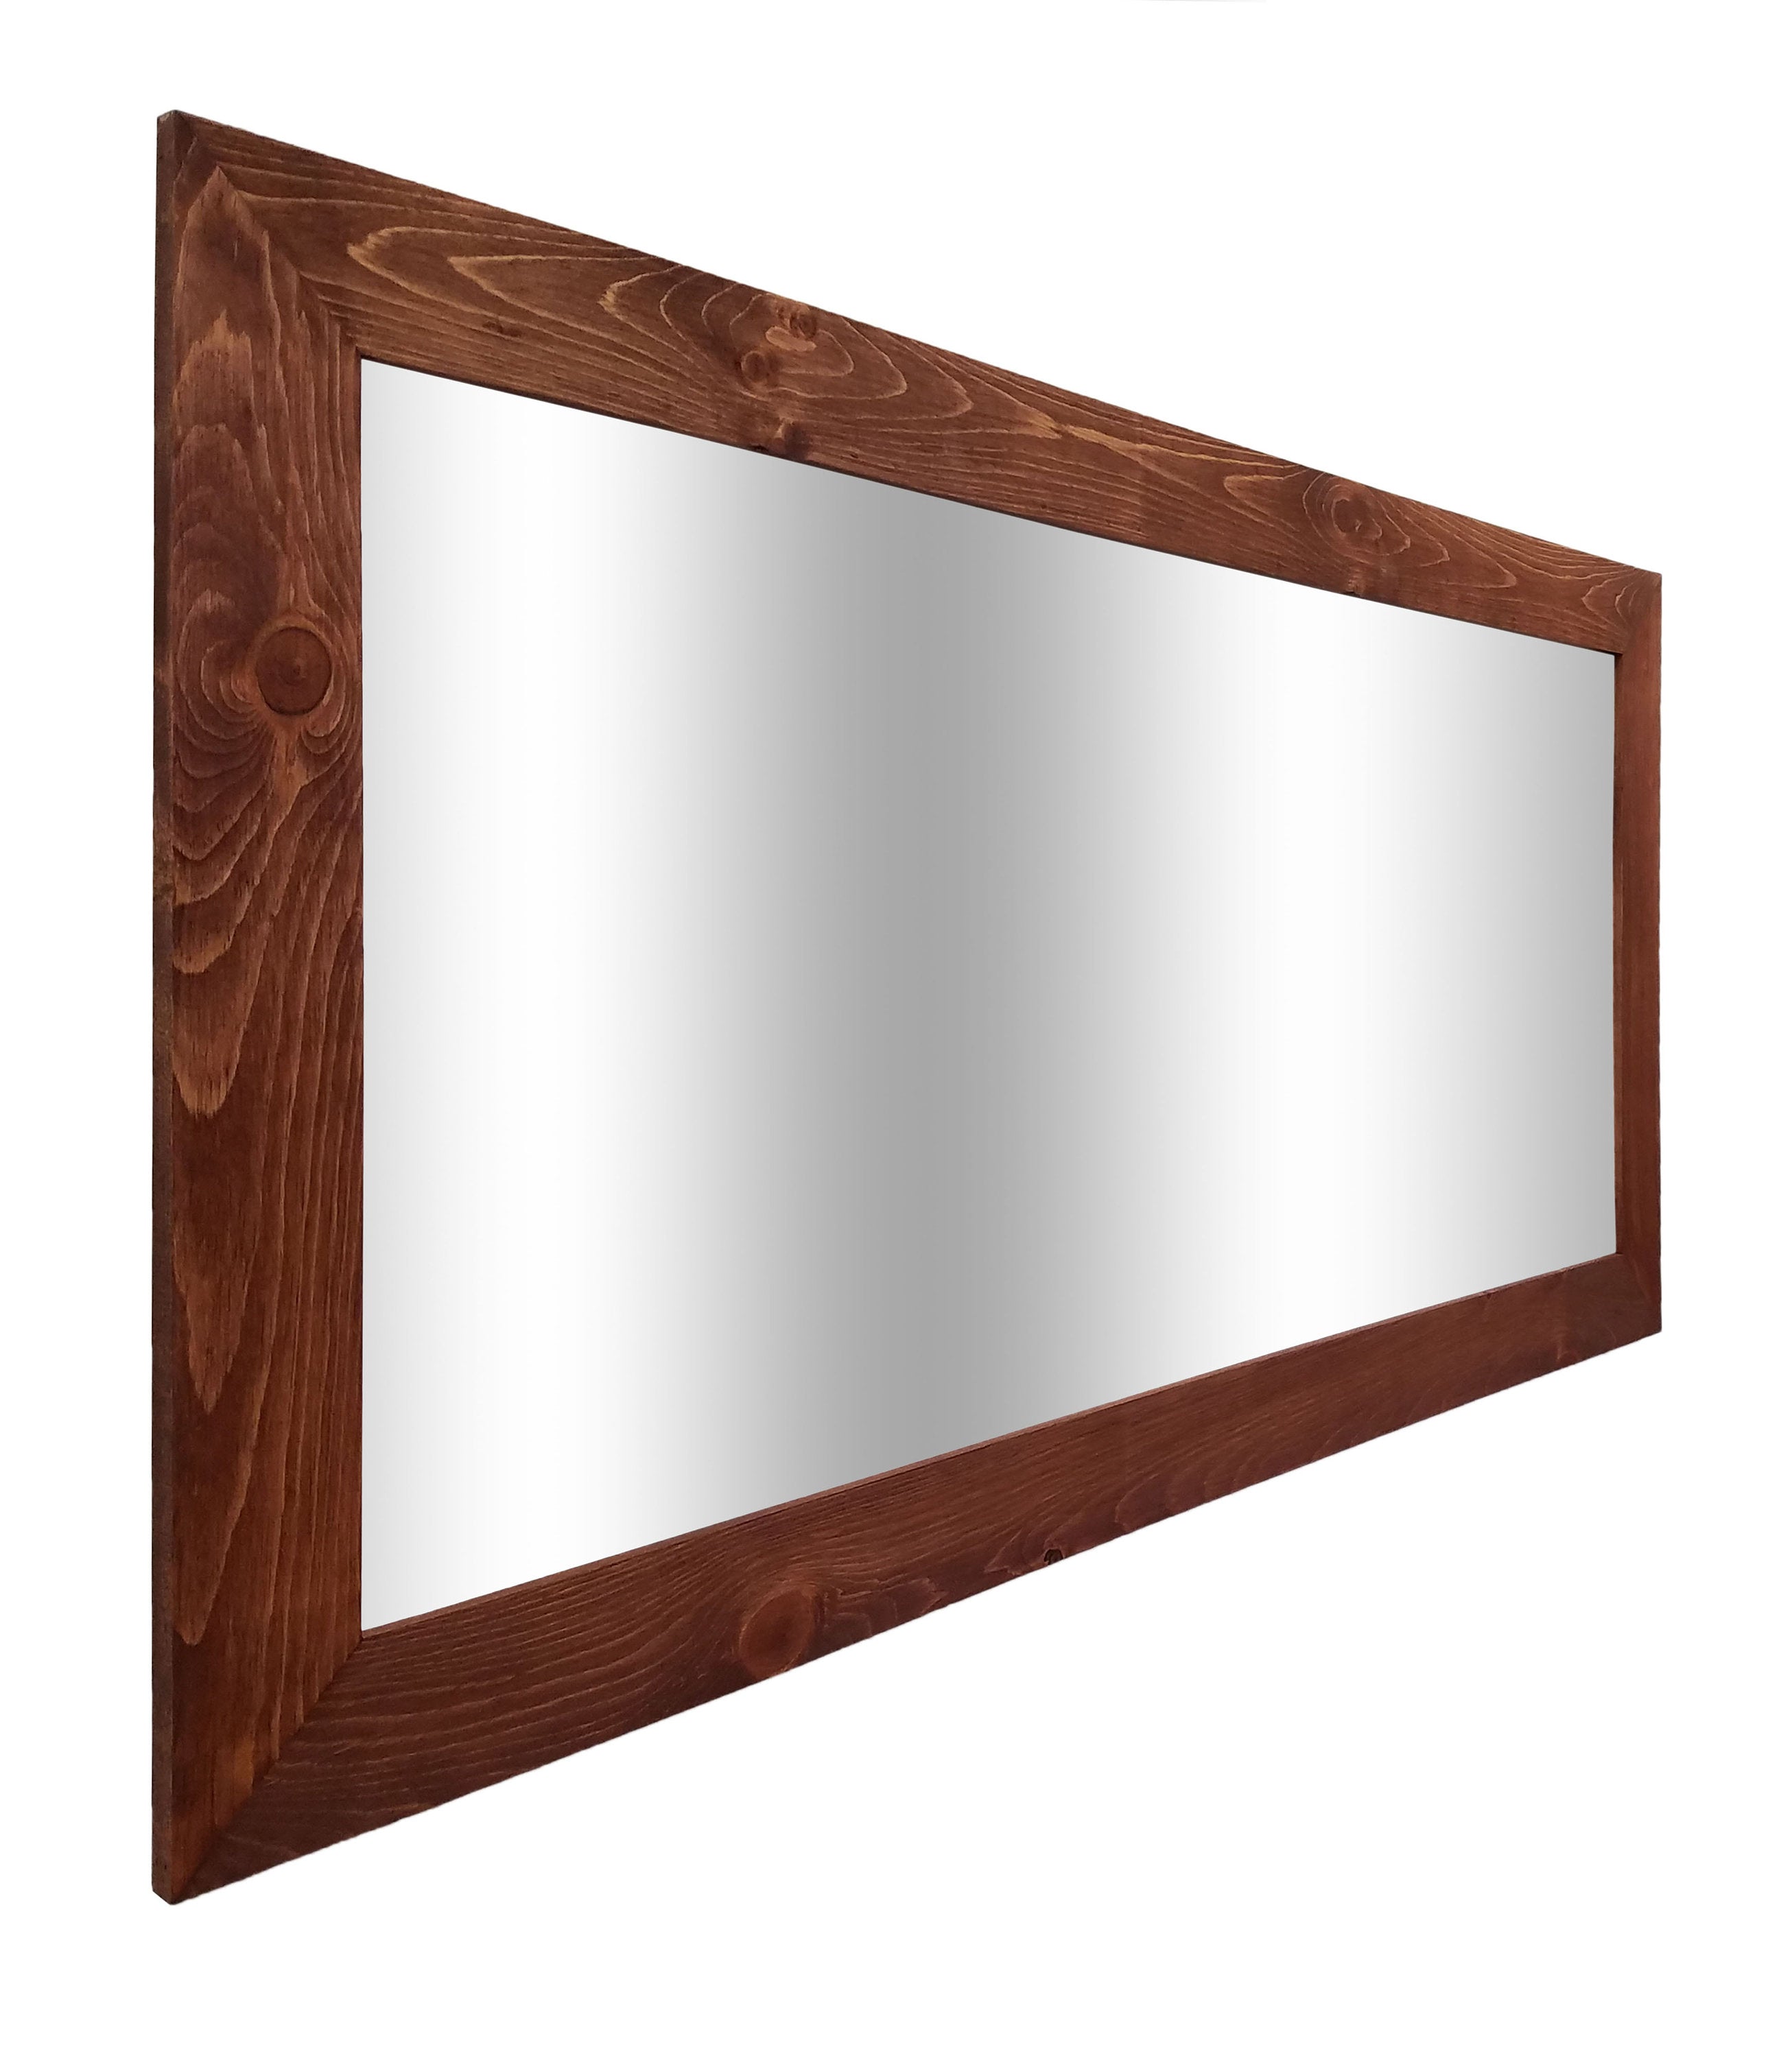 Shiplap Reclaimed Wood Mirror Shown in English Chestnut, 4 Sizes & 20 Stains - Renewed Decor & Storage